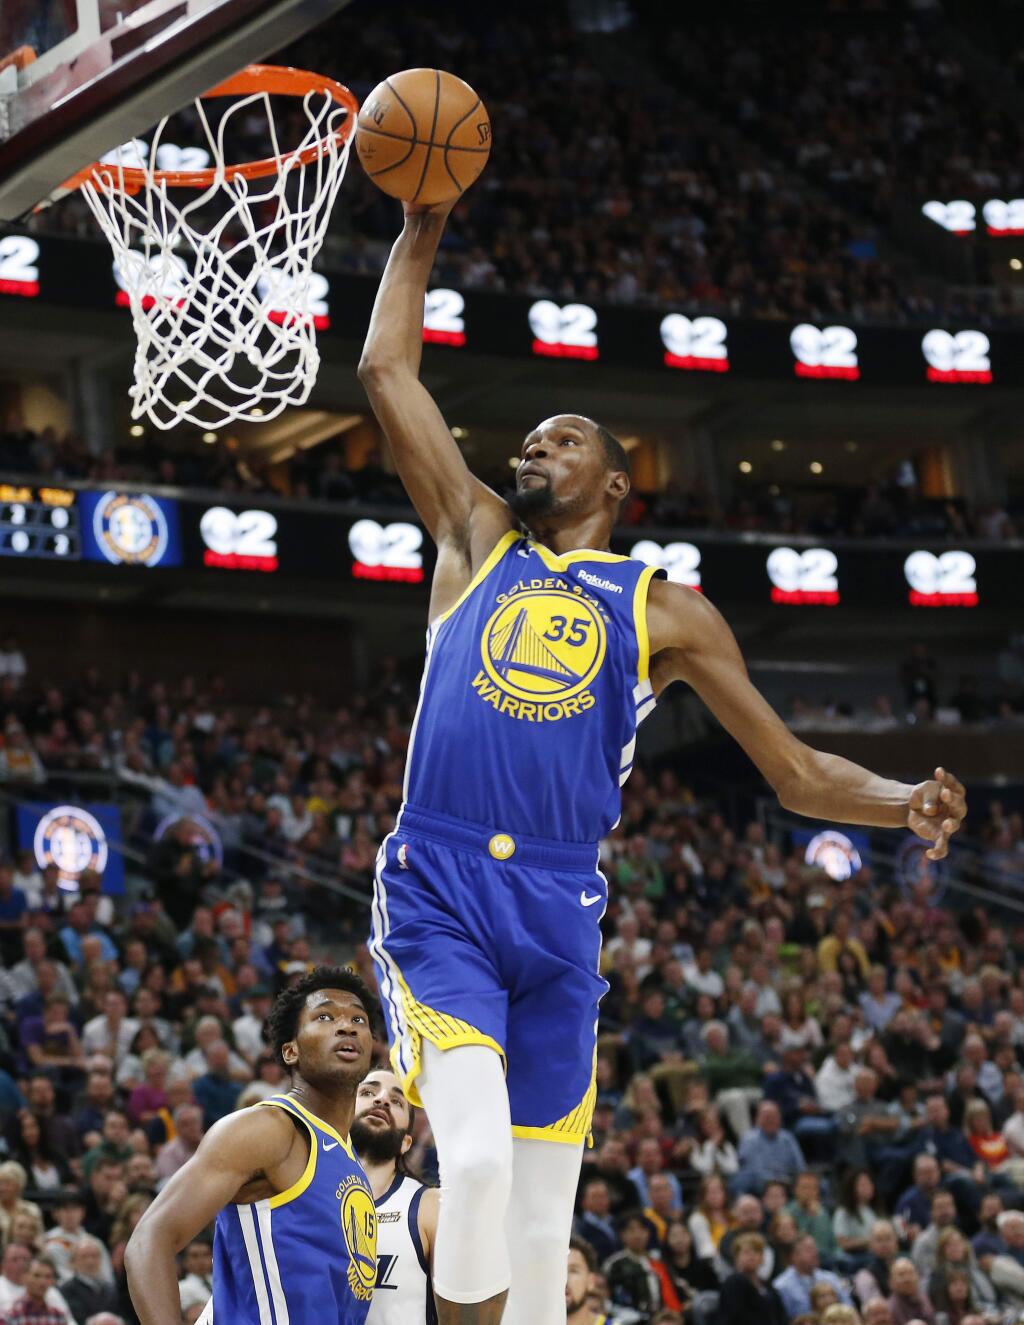 Golden State Warriors forward Kevin Durant dunks as teammate Damian Jones and Utah Jazz guard Ricky Rubio, rear, watch in the first half Friday, Oct. 19, 2018, in Salt Lake City. (AP Photo/Rick Bowmer)